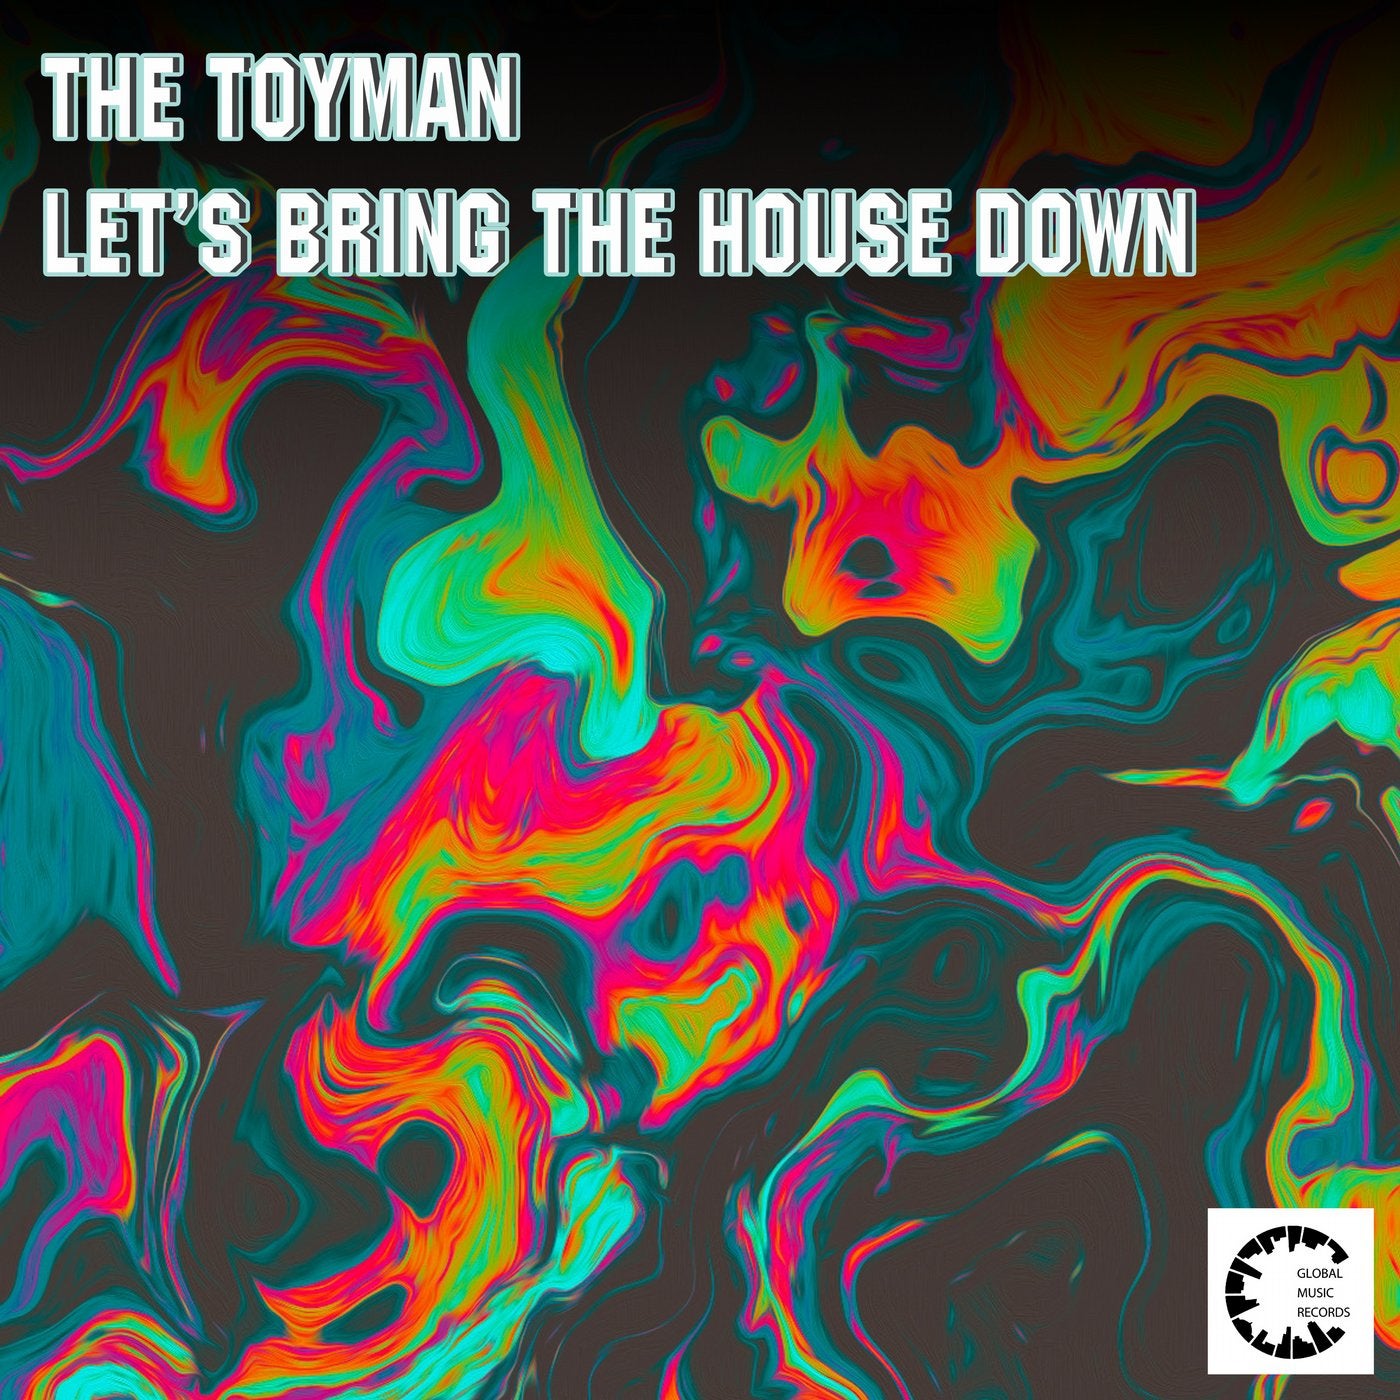 Let's Bring the House Down